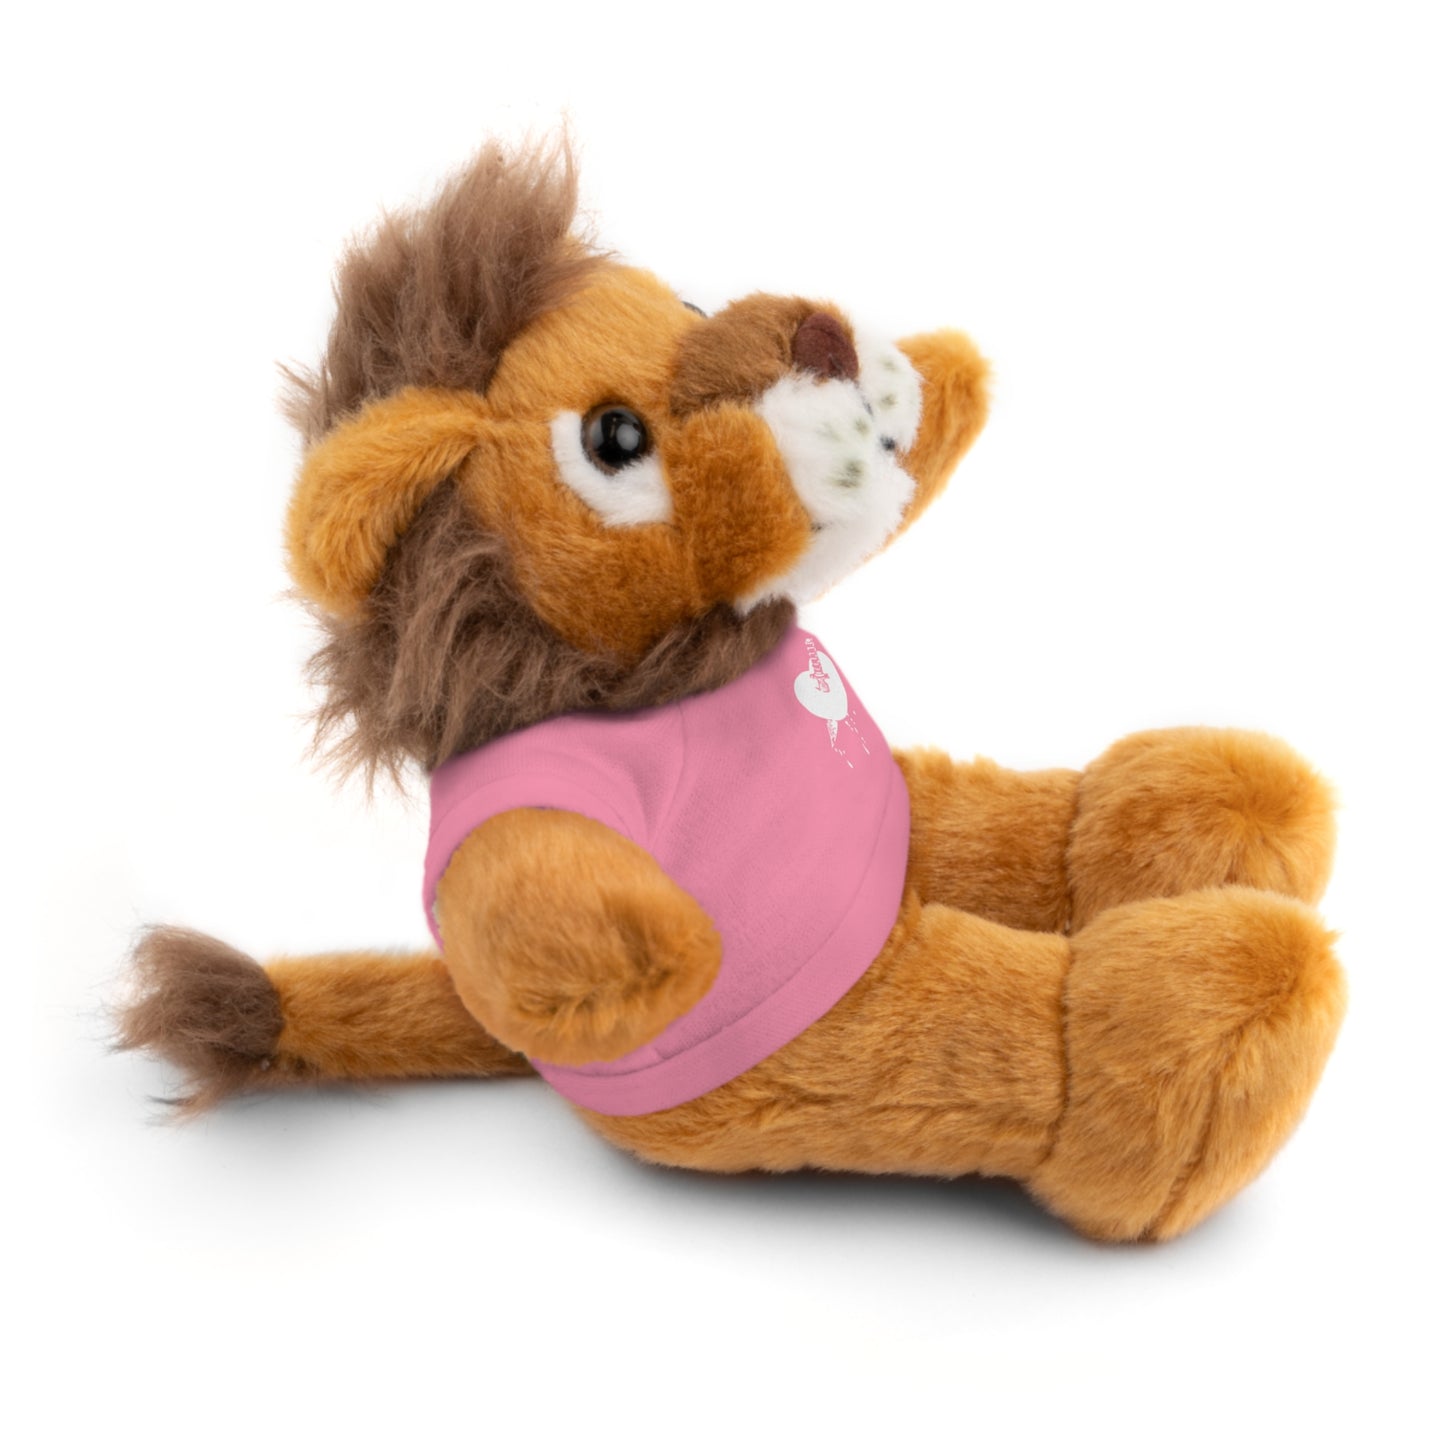 As if you love me Stuffed Animals with Tee